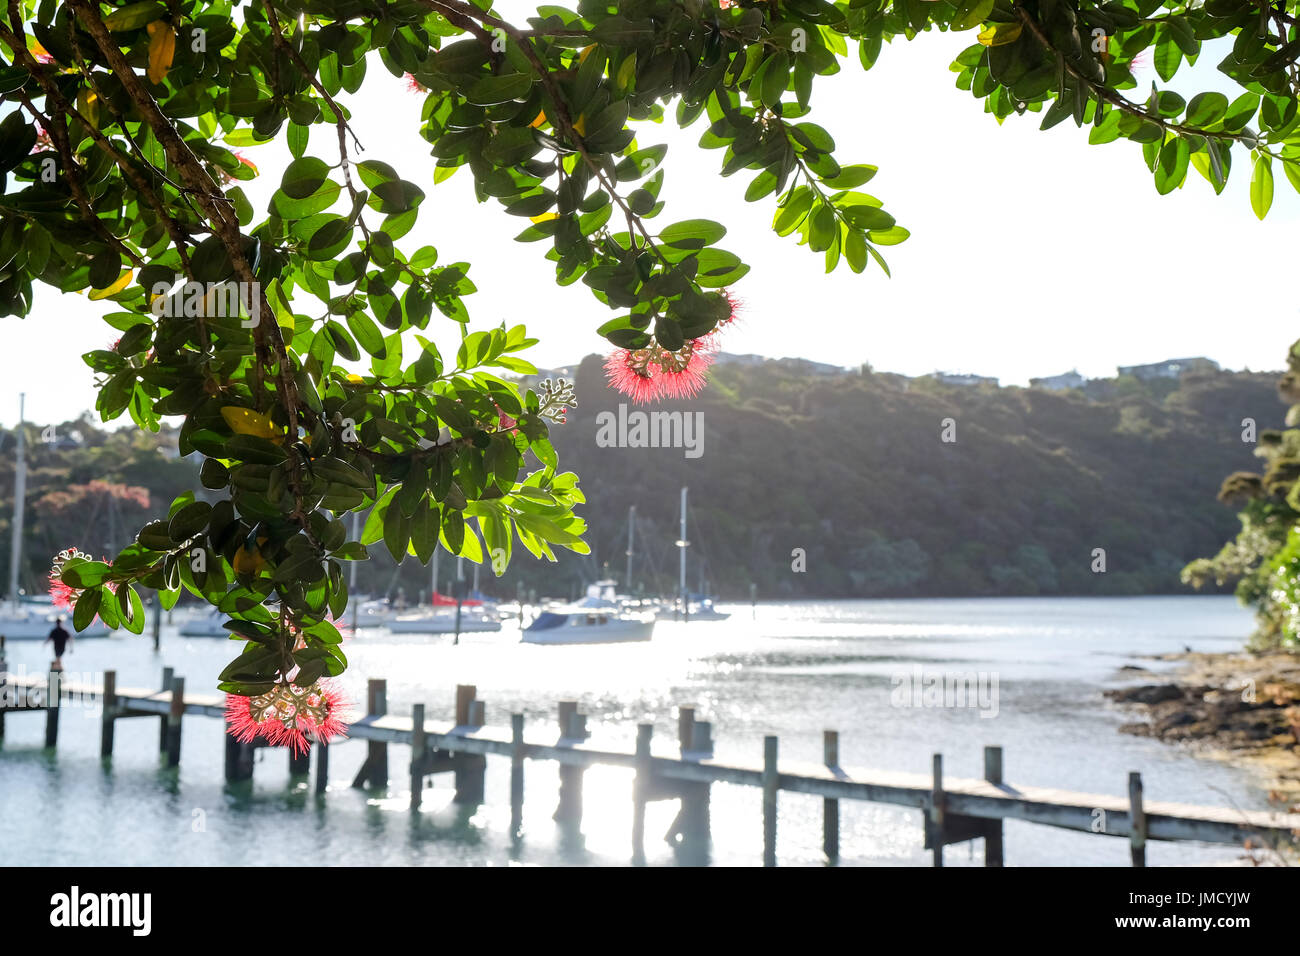 Pohutukawa tree and flowers at Doves Bay Marina, Kerikeri, Northland, New Zealand, NZ with boats and pier in background Stock Photo